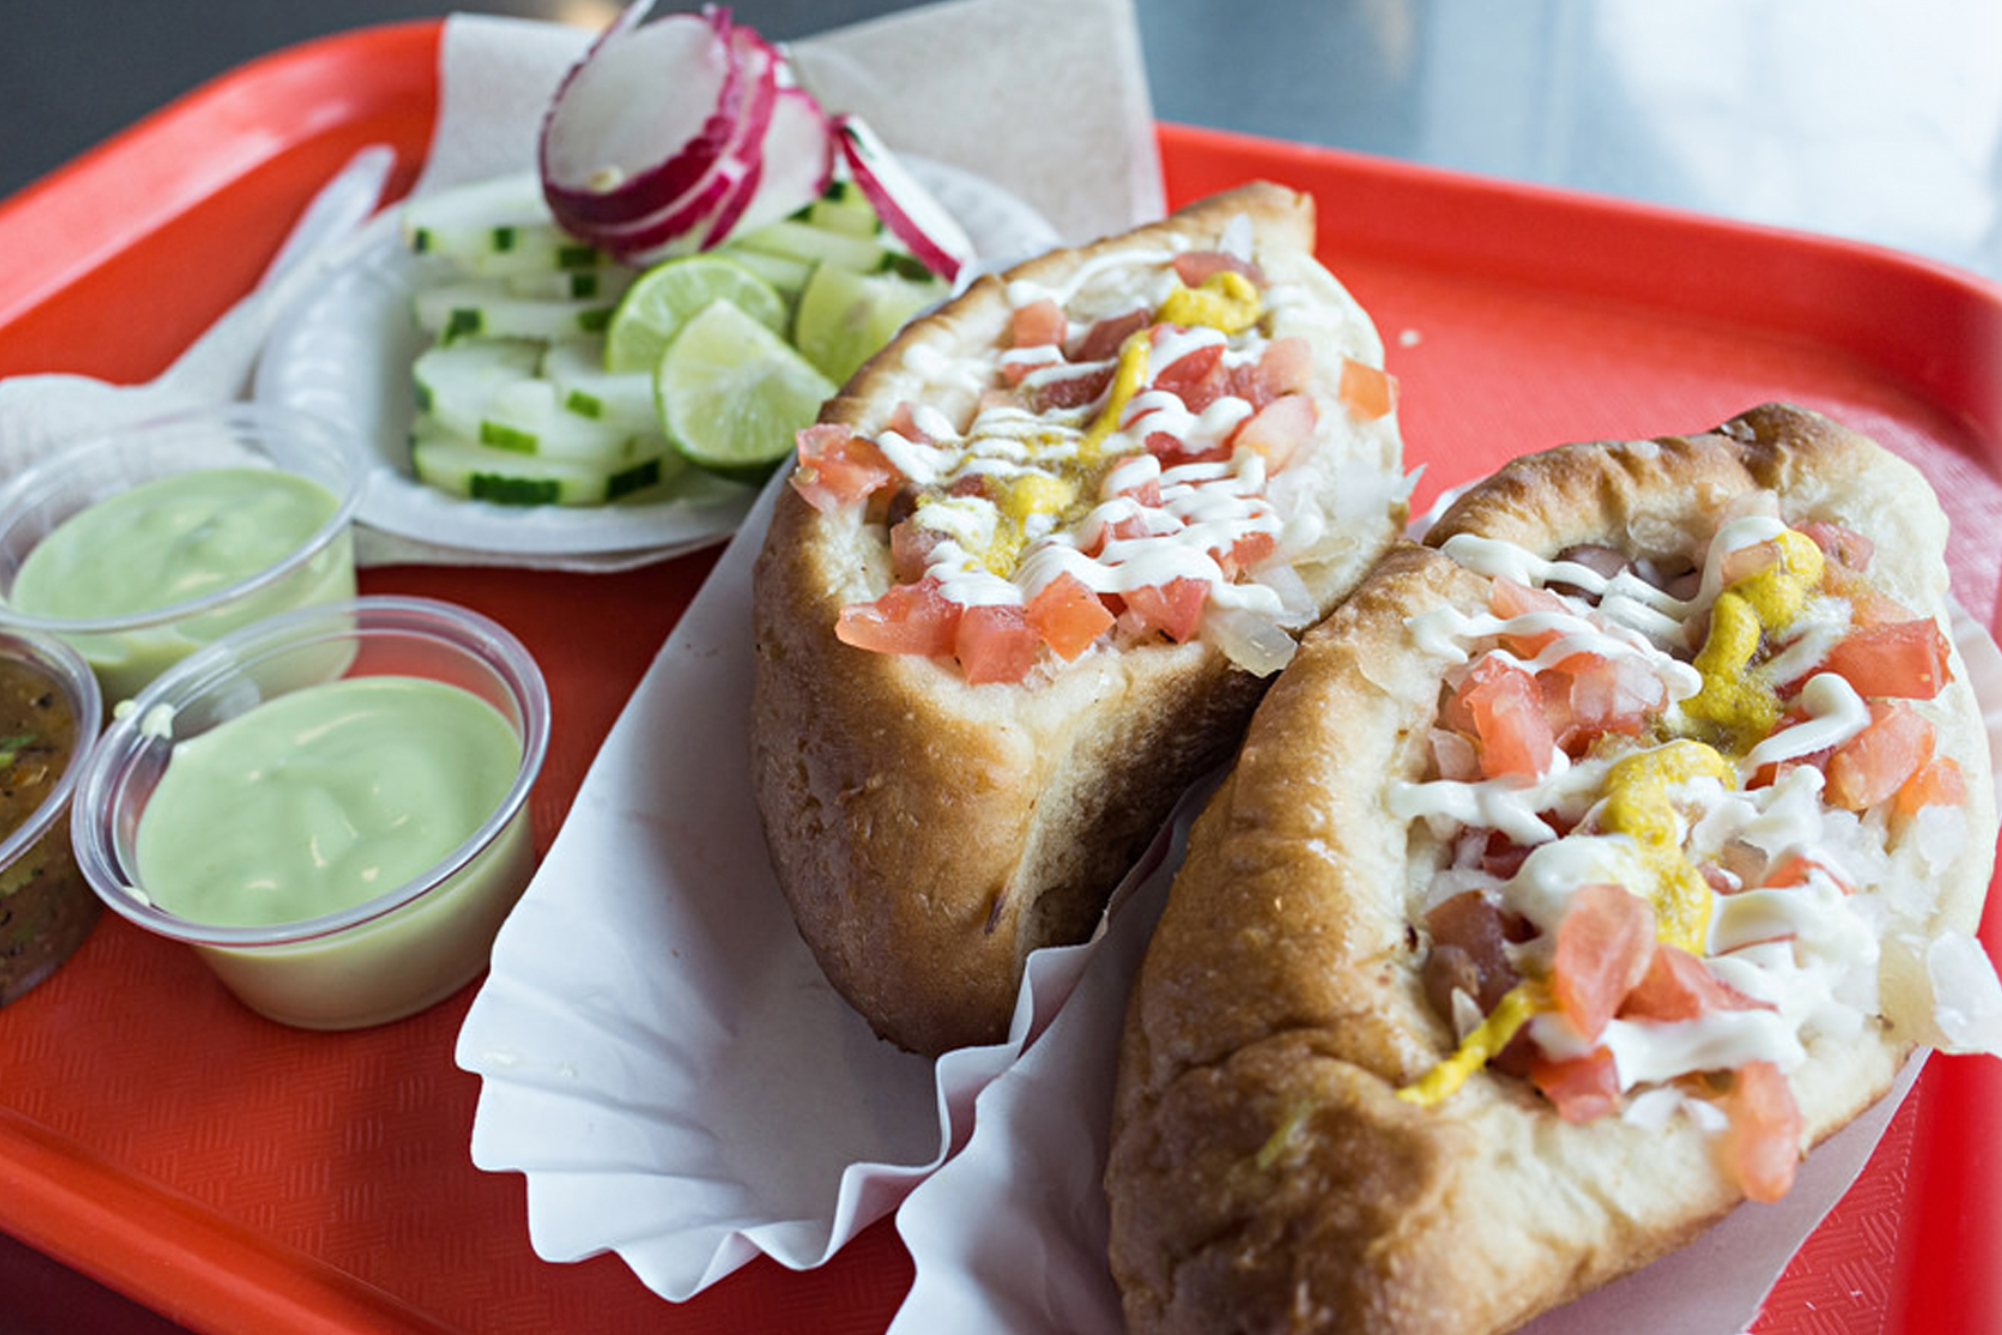 Where to get the best Sonoran hot dogs in Tucson